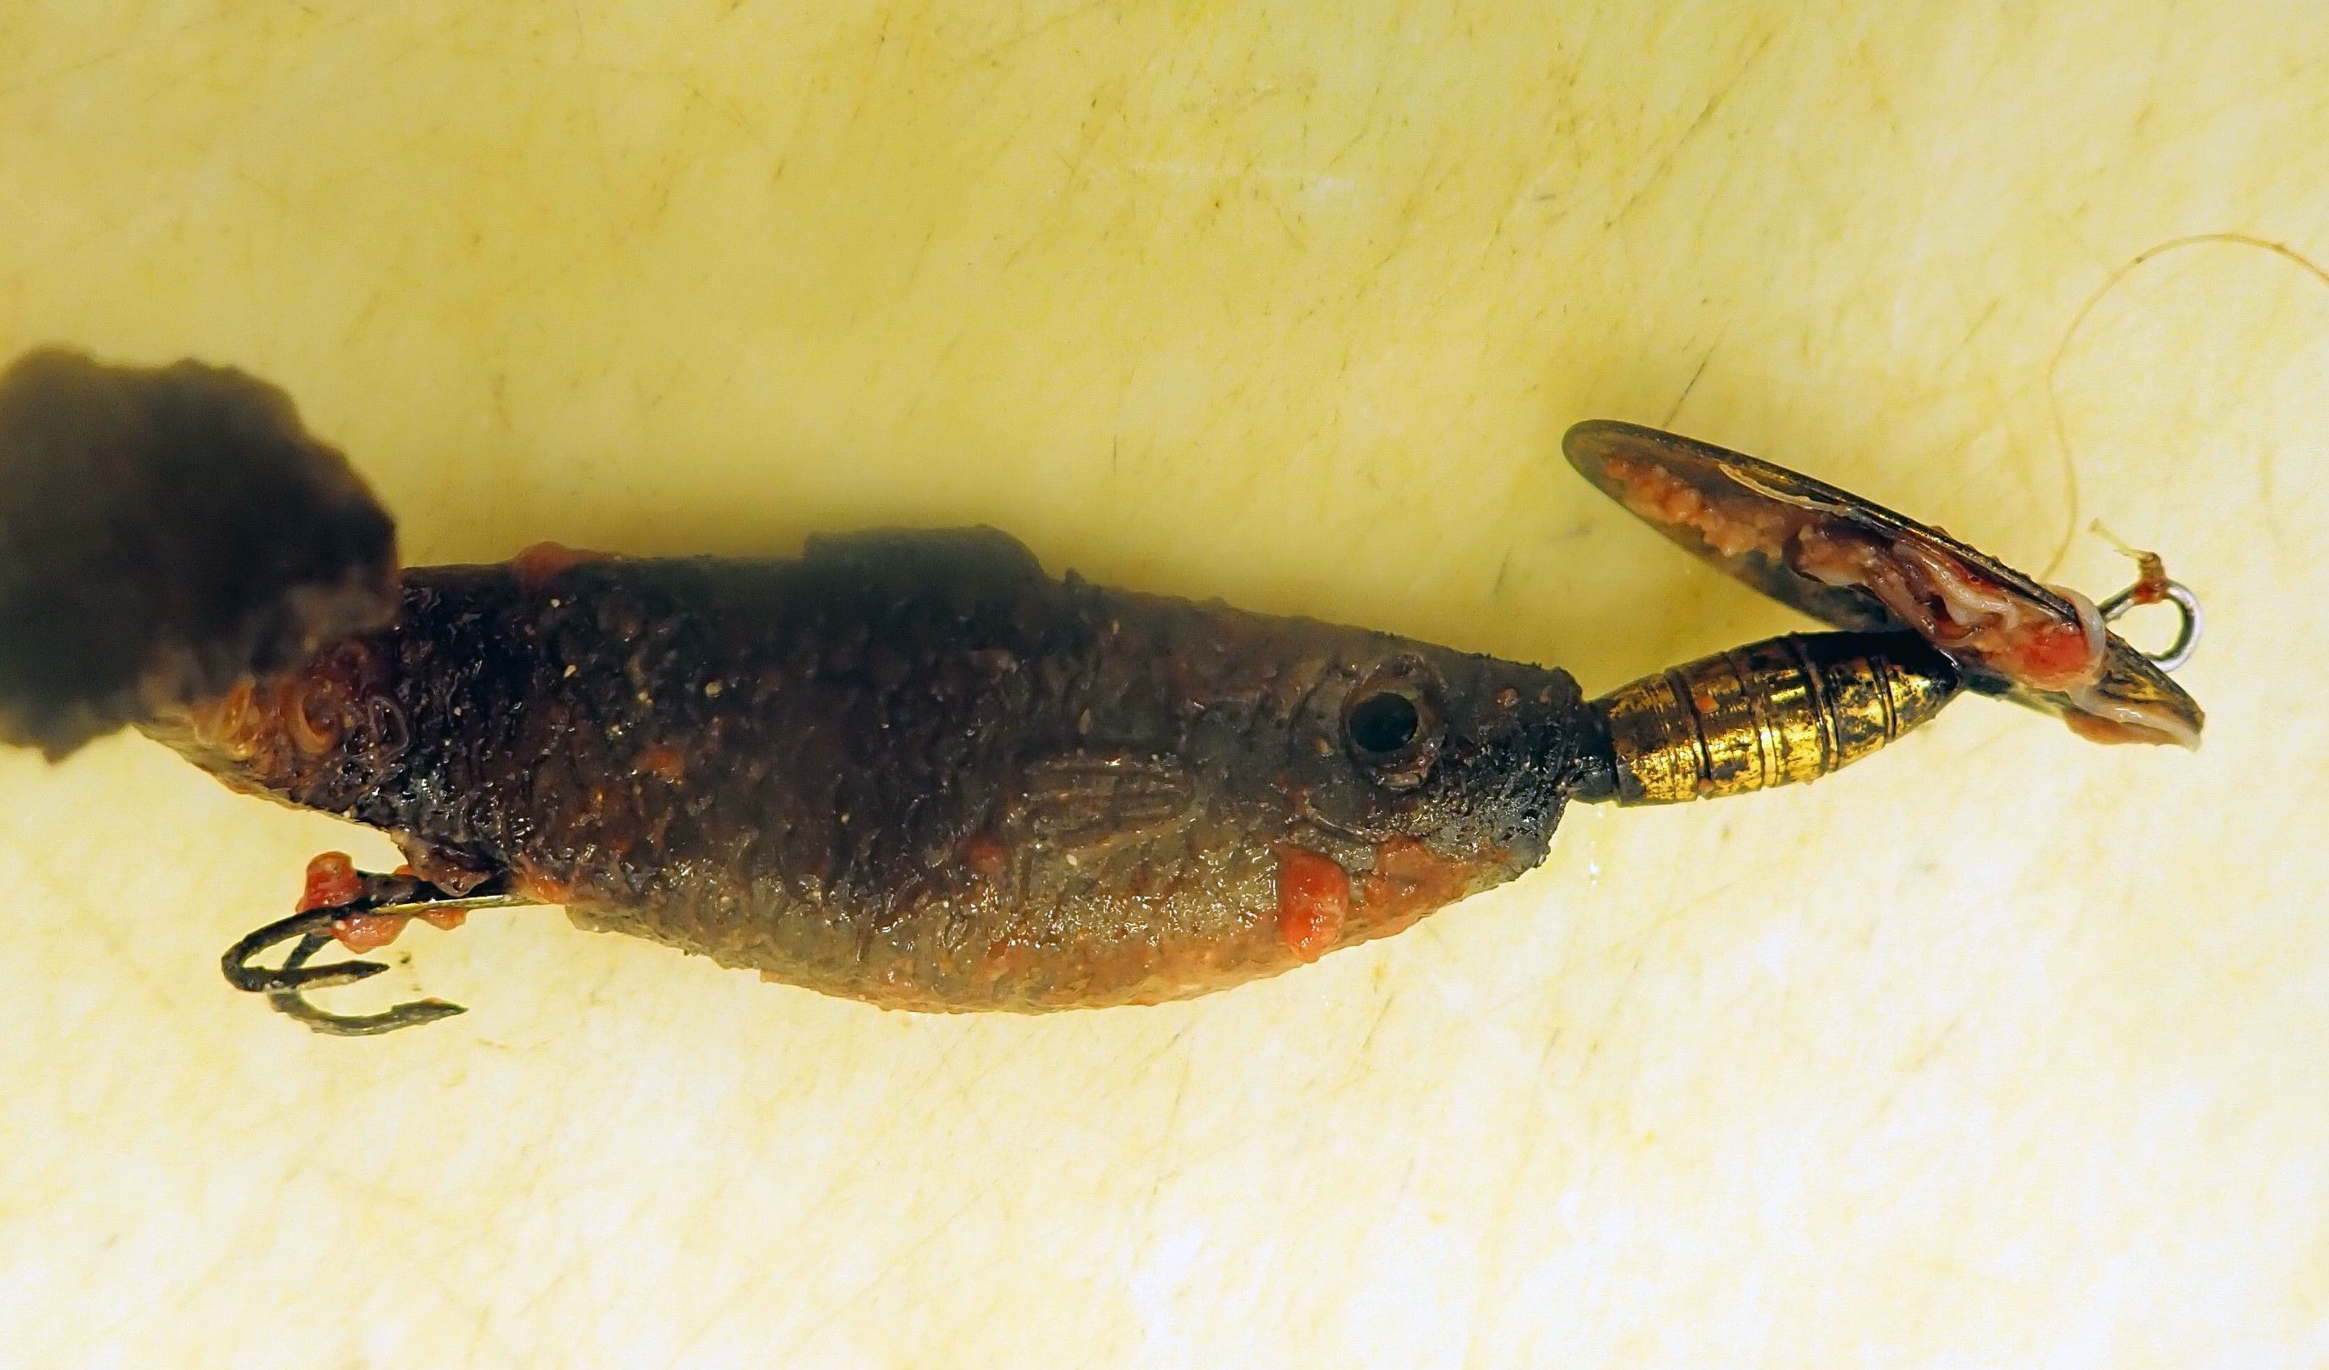 A fishing lure taken from the gut of a Double-crested Cormorant